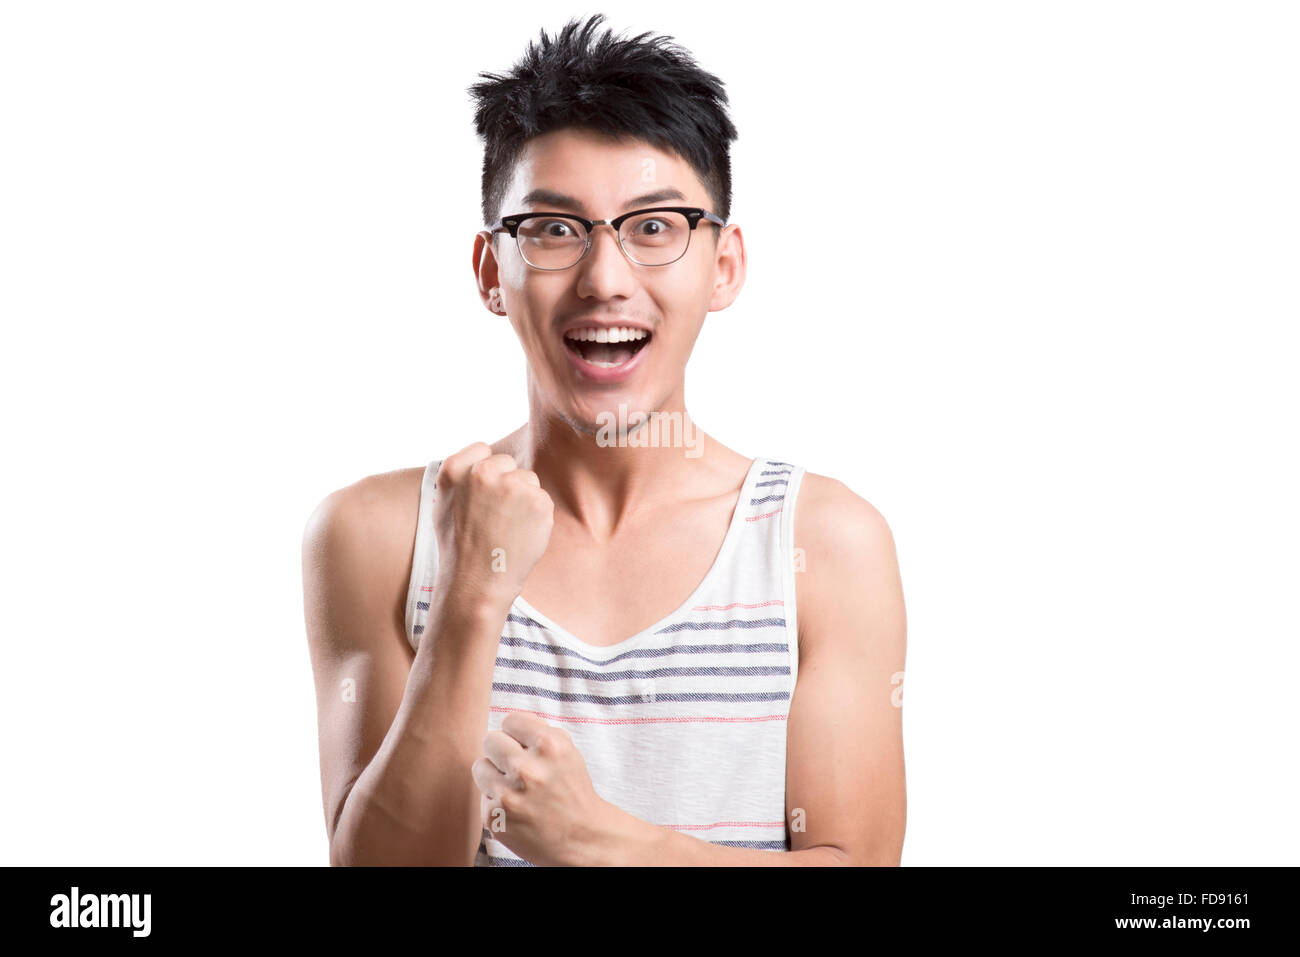 Portrait of young man cheering Banque D'Images